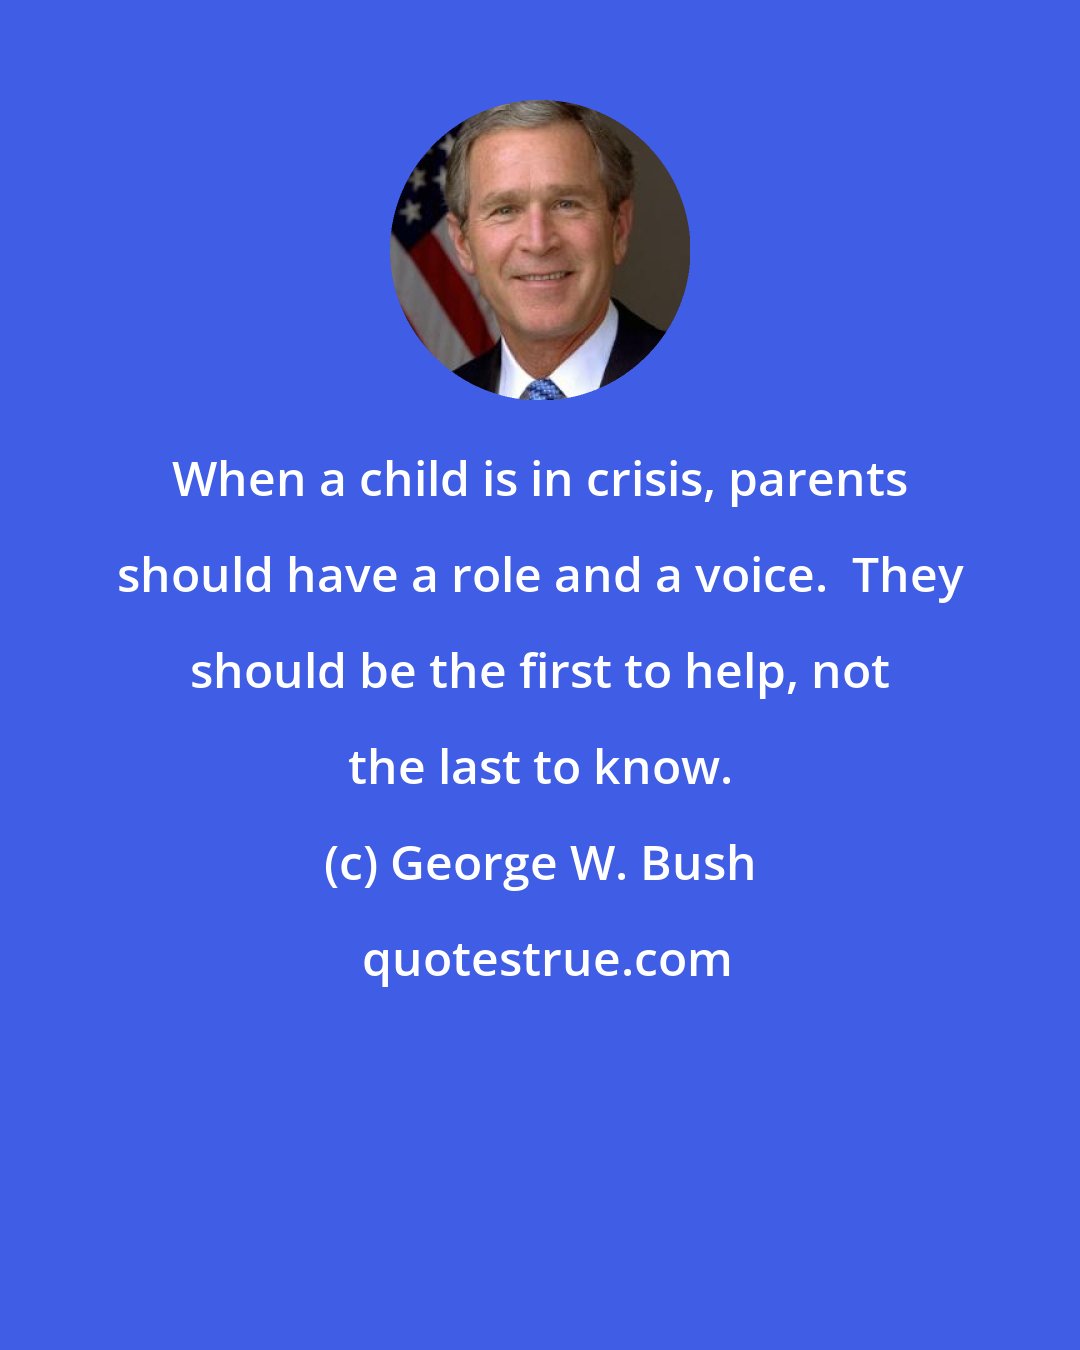 George W. Bush: When a child is in crisis, parents should have a role and a voice.  They should be the first to help, not the last to know.